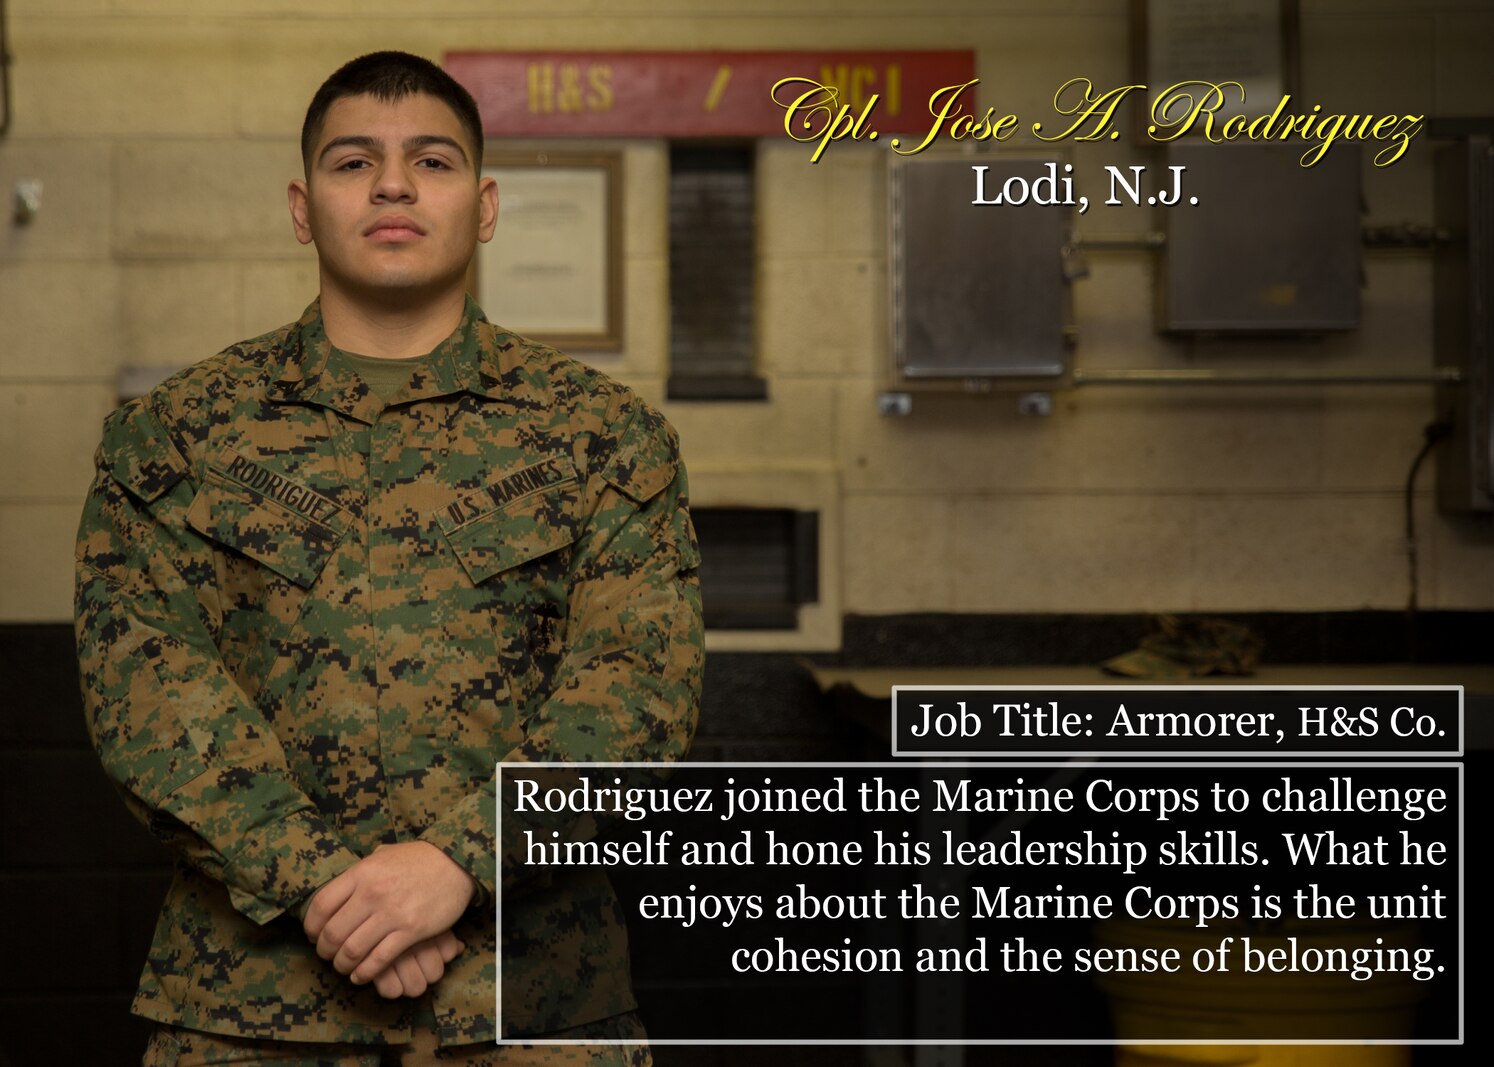 Cpl. Jose A. Rodriguez
Lodi, N.J.
Job Title: Armorer, H&S Co.
Rodriguez joined the Marine Corps to challenge himself and hone his leadership skills. What he enjoys about the Marine Corps is the unit cohesion and the sense of belonging.
(Official Marine Corps graphic by Cpl. Chi Nguyen/Released)